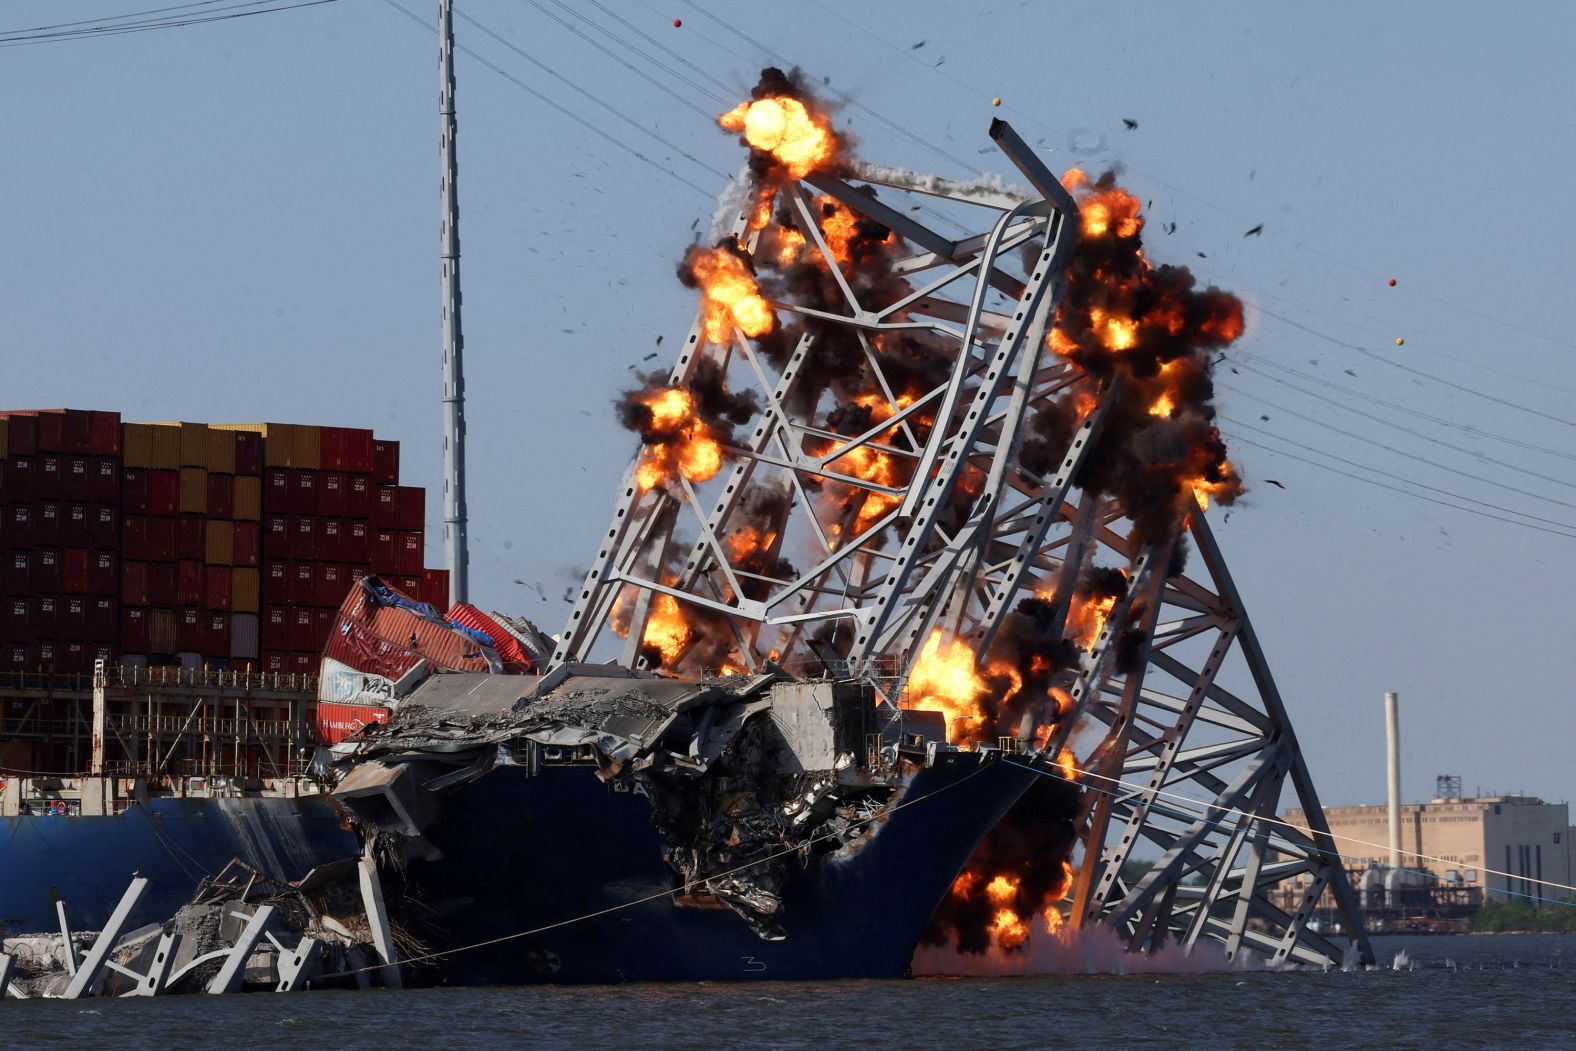 Explosive charges are set off at a portion of the collapsed Francis Scott Key Bridge in Baltimore on Monday, May 13. The charges helped demolish a portion of the bridge wreckage that was resting on the trapped cargo ship Dali. <a href="index.php?page=&url=https%3A%2F%2Fwww.cnn.com%2F2024%2F05%2F13%2Fus%2Fbaltimore-bridge-collapse-demolition-monday%2Findex.html" target="_blank">The move</a> was meant to help free the vessel nearly seven weeks after it struck the bridge and caused the span to collapse.